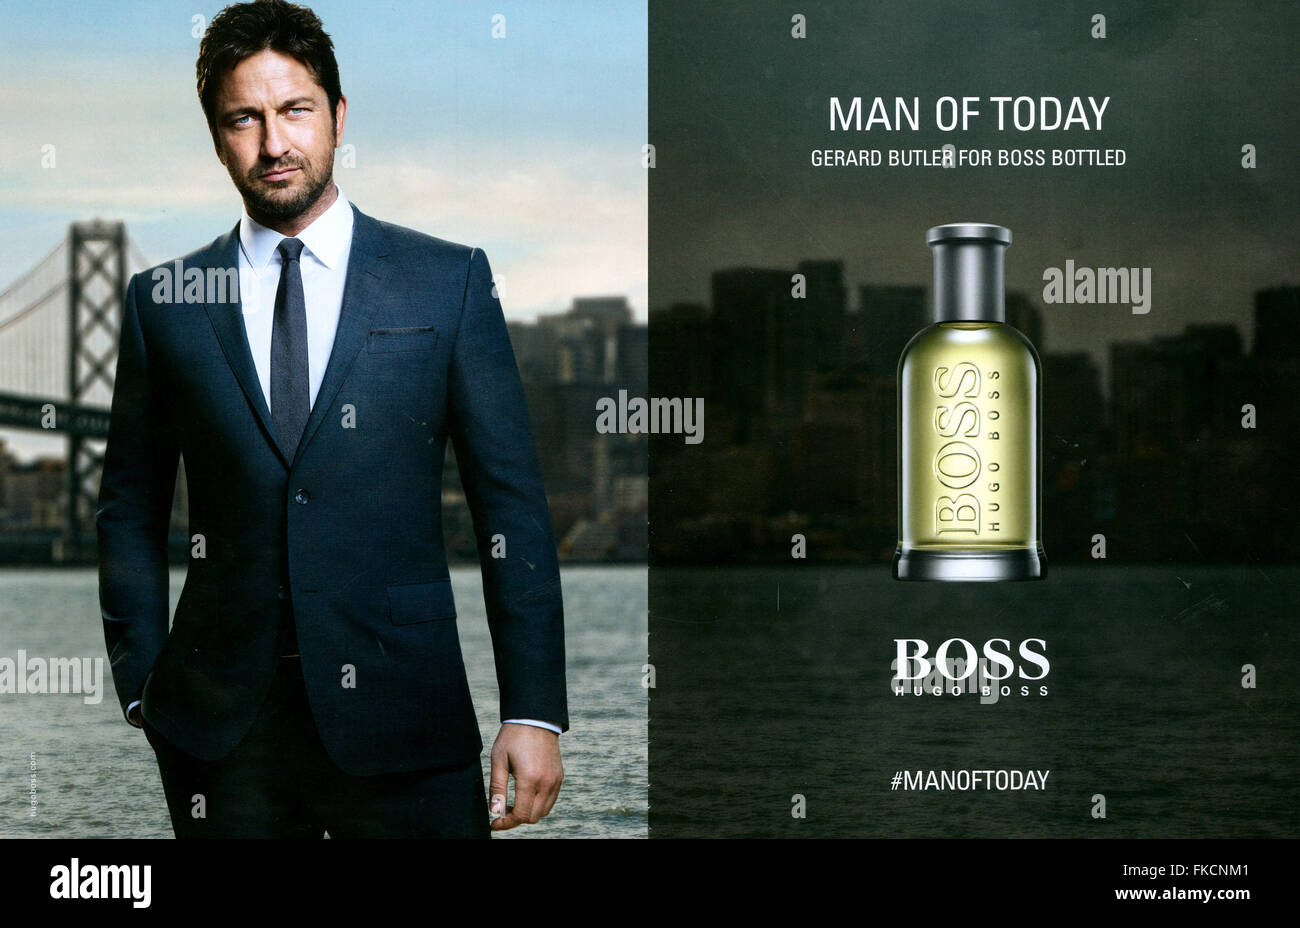 boss aftershave advert